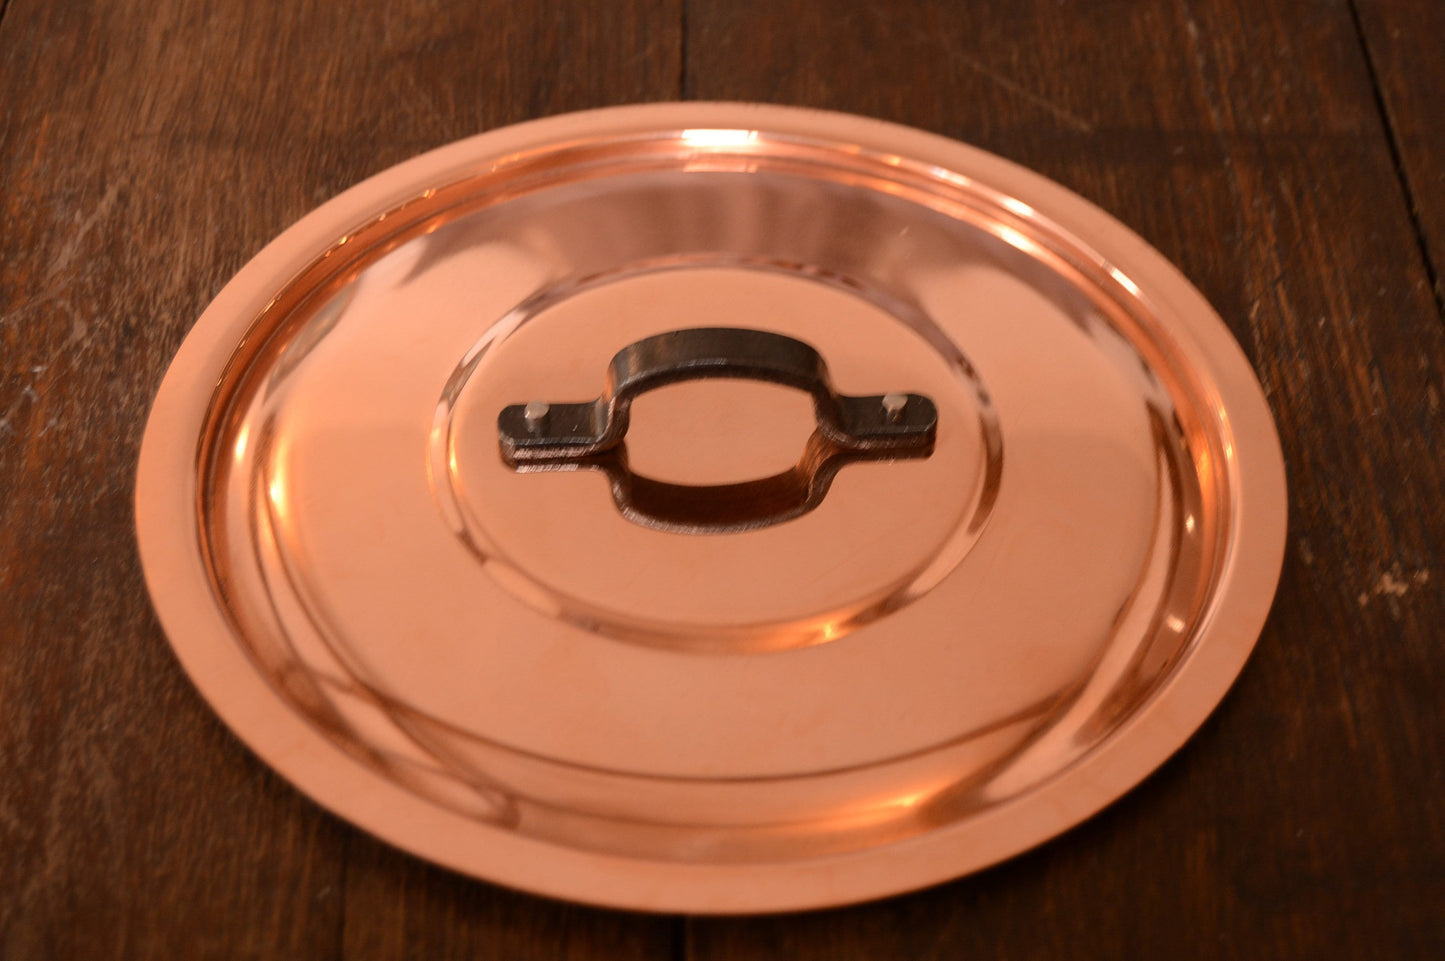 New NKC 18cm Normandy Kitchen Copper Pan Lid Made in France Fitted Copper Pan Lid for 18cm Pan Quality 7" Iron Handle Tin Lined New Copper